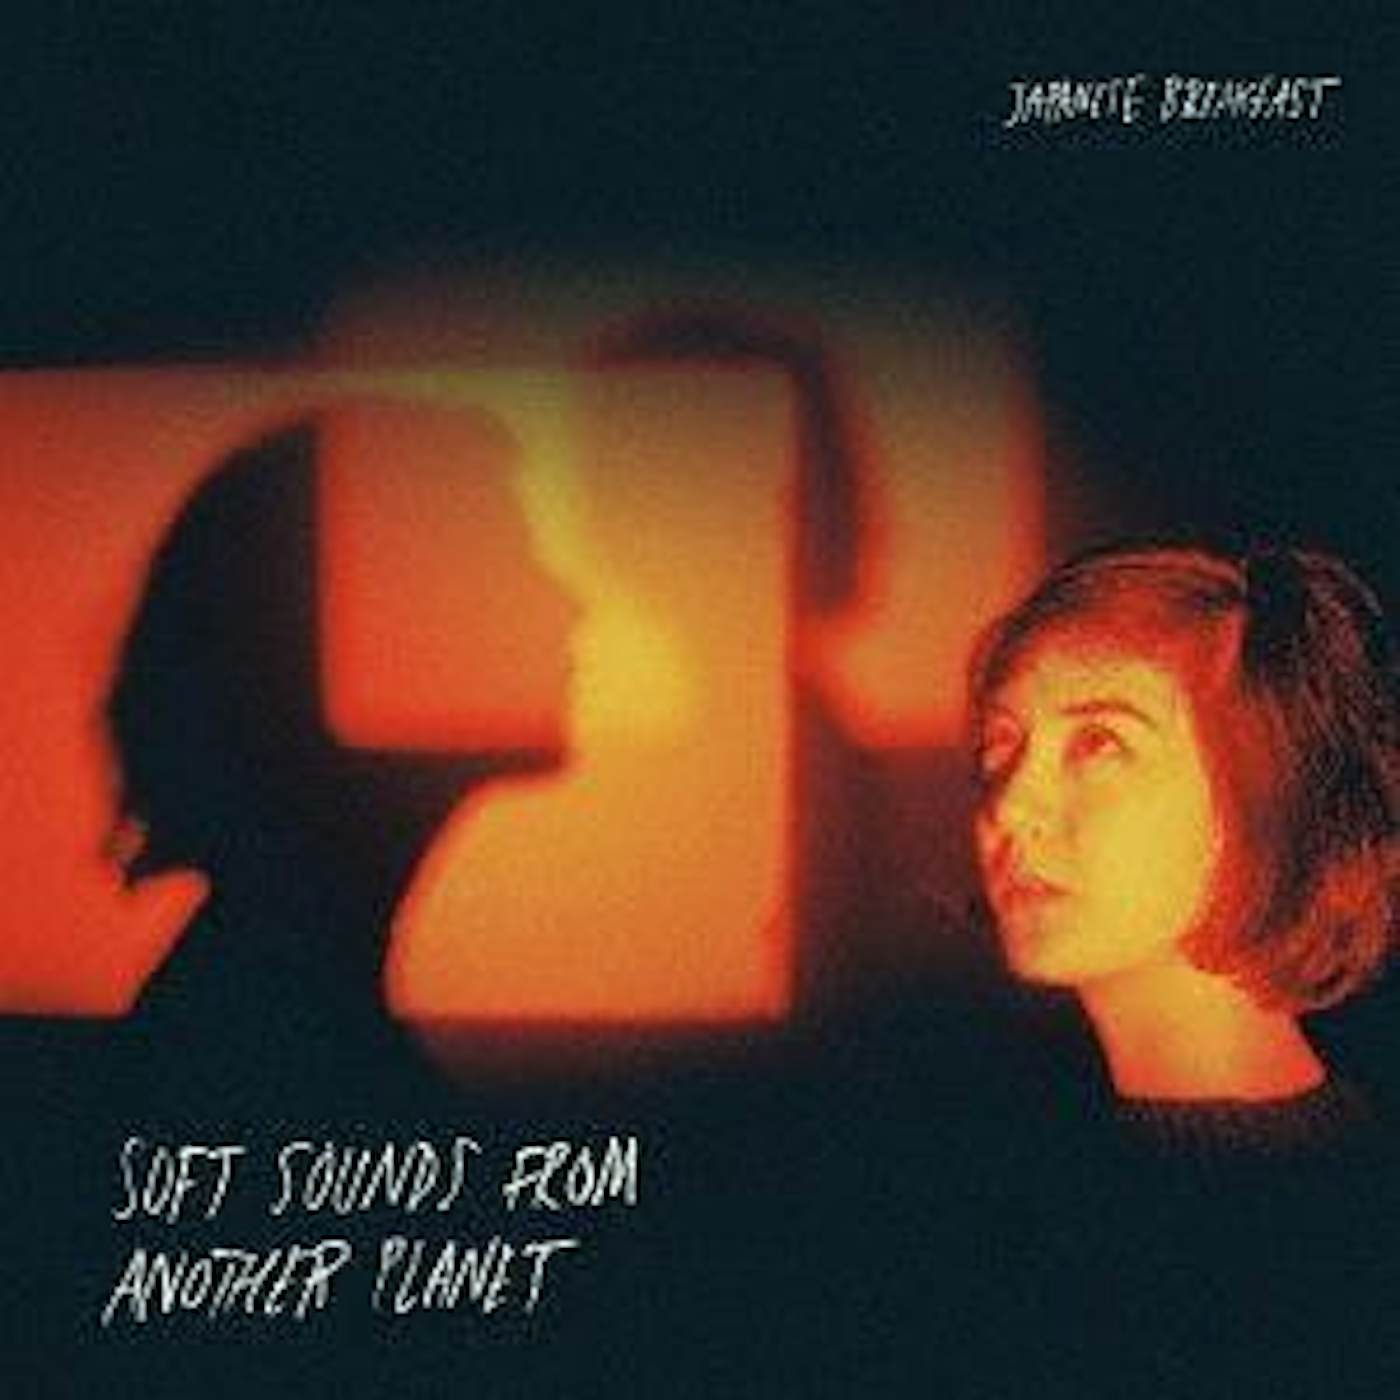 Japanese Breakfast SOFT SOUNDS FROM ANOTHER PLANET (BONUS TRACK) CD